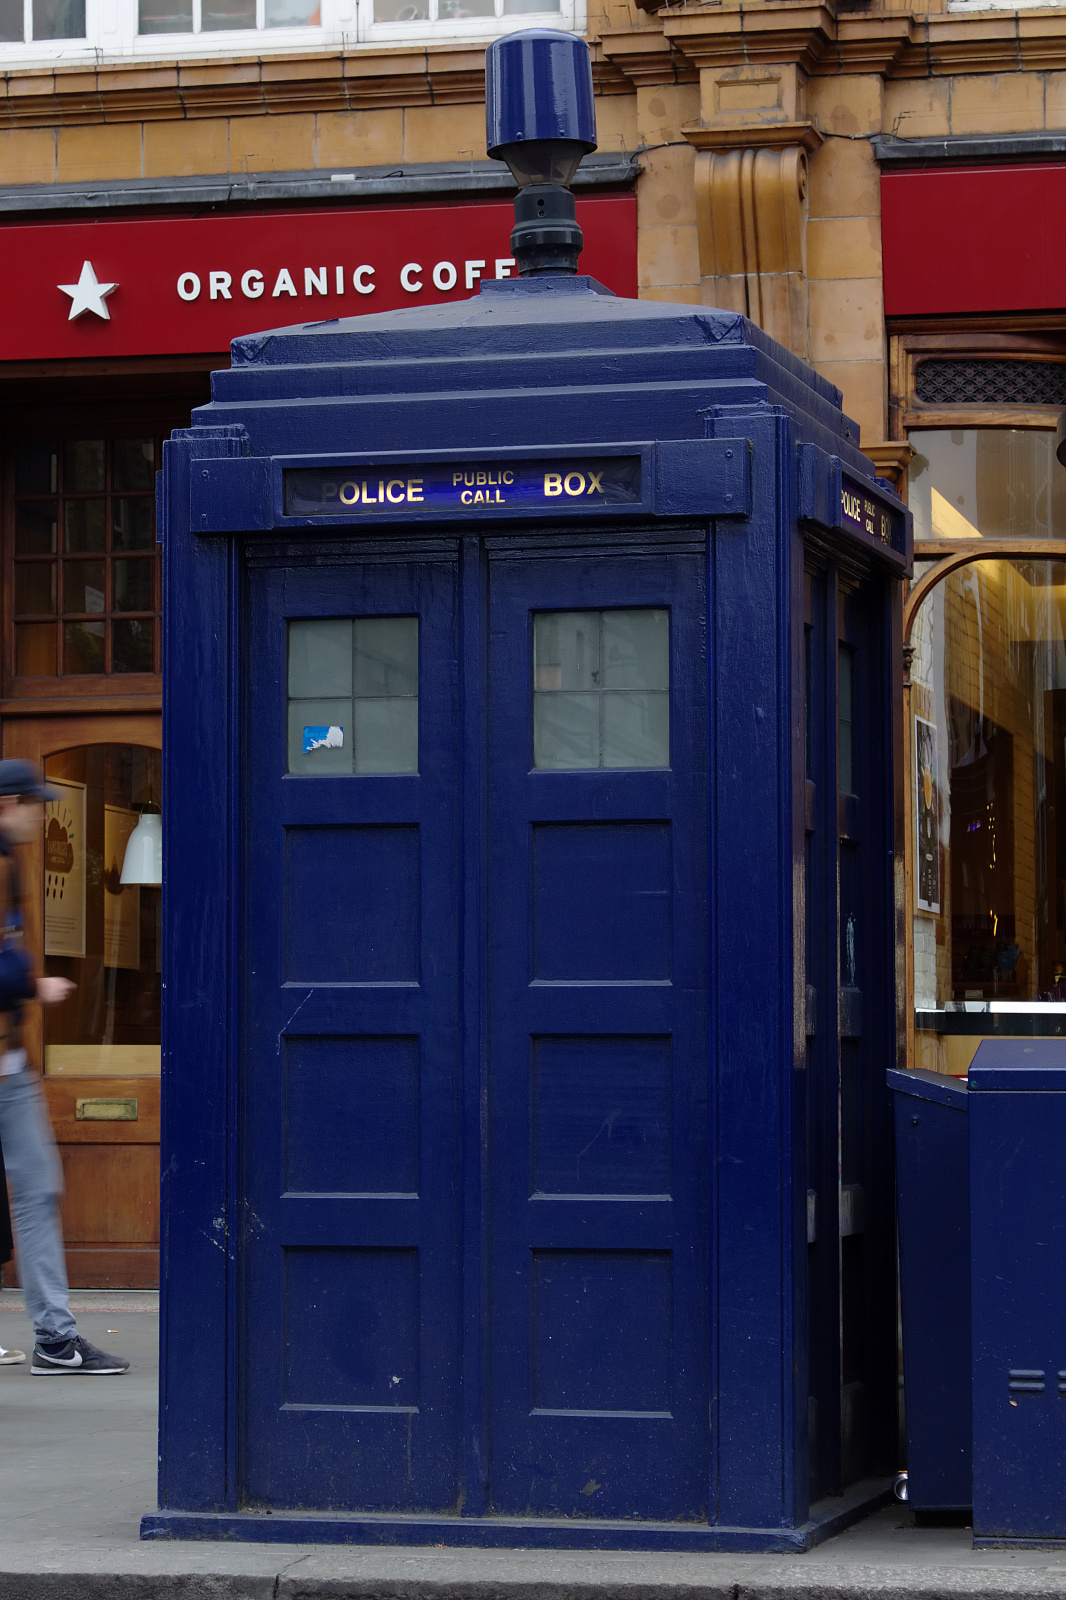 Police Box - Earls Court (Travels » London » London at Day)